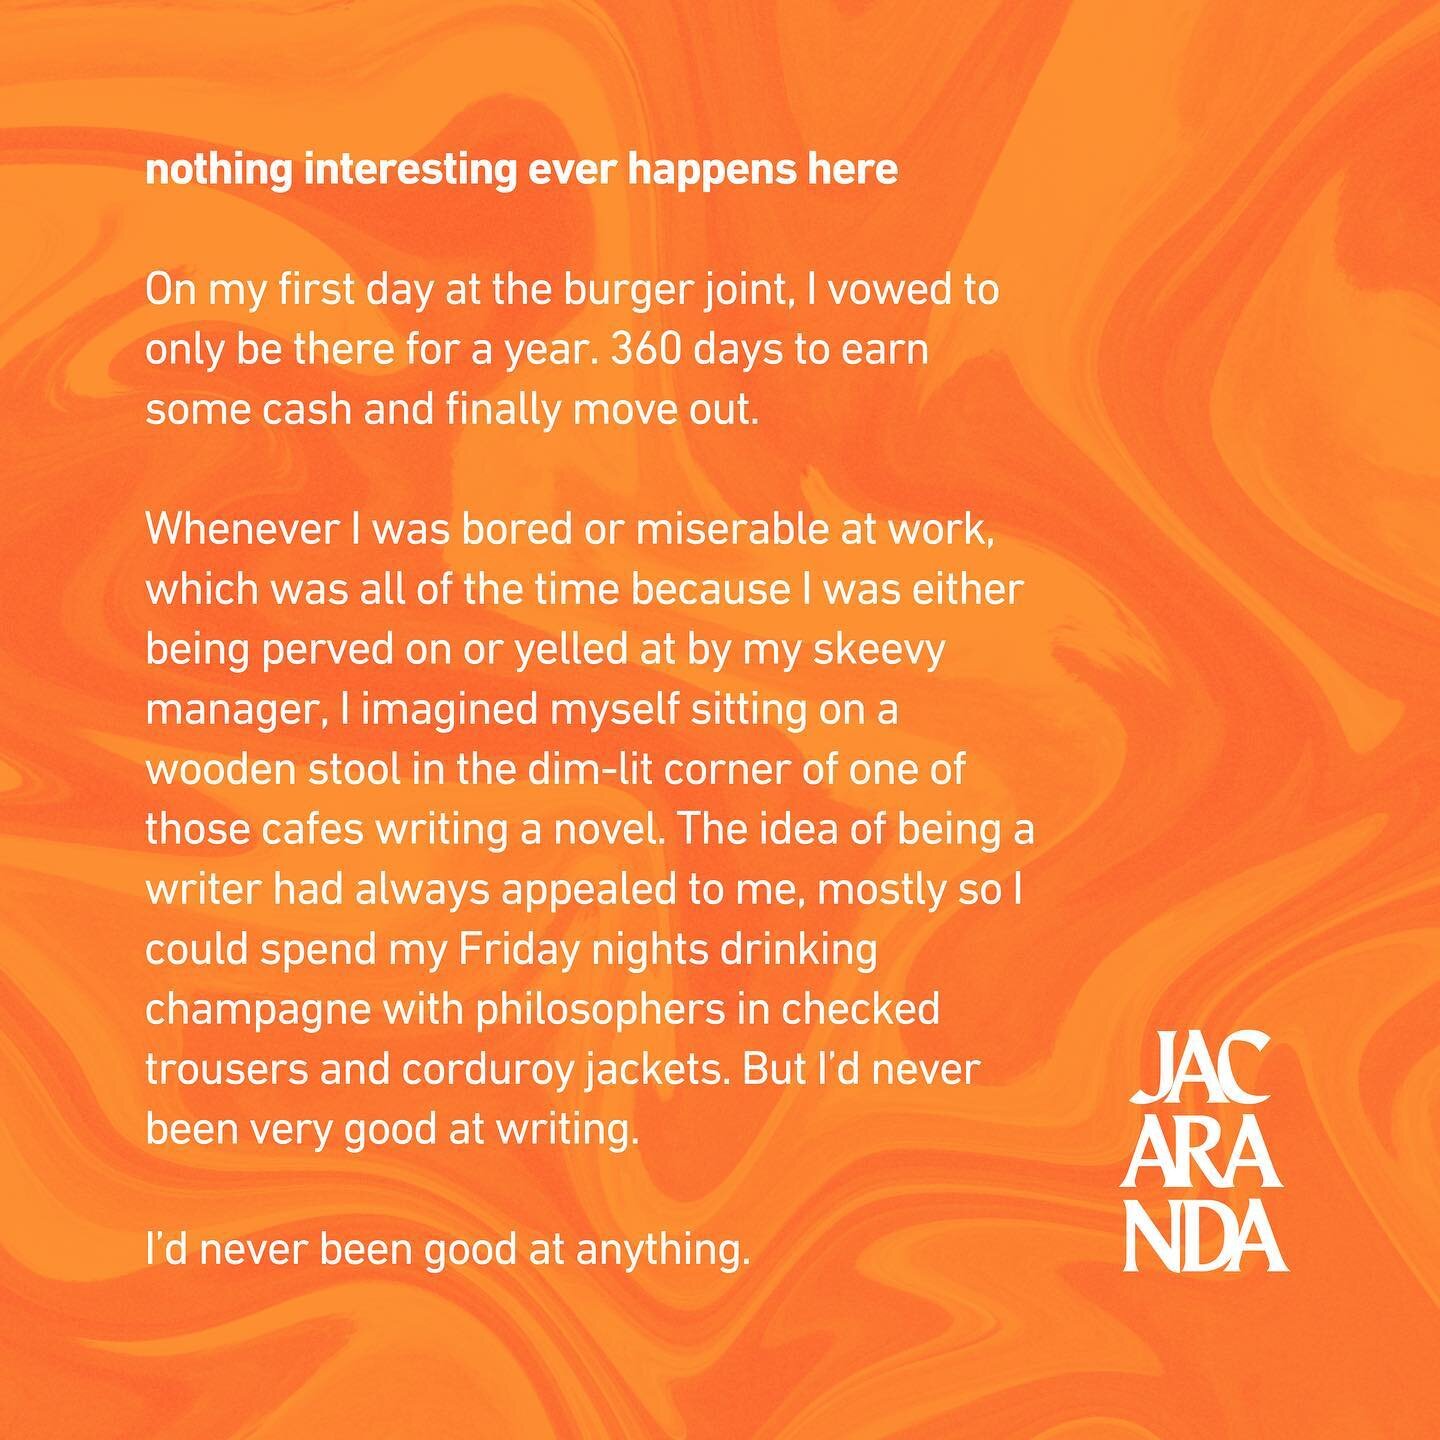 ✨ 4 DAYS TO GO ✨

Underground Theatre Company and @jacarandajournaluq are proud to present &lsquo;nothing interesting ever happens here&rsquo;, a compelling short story by Lara Kenny. 

This piece is based on a conversation with &lsquo;FAST FOOD&rsqu